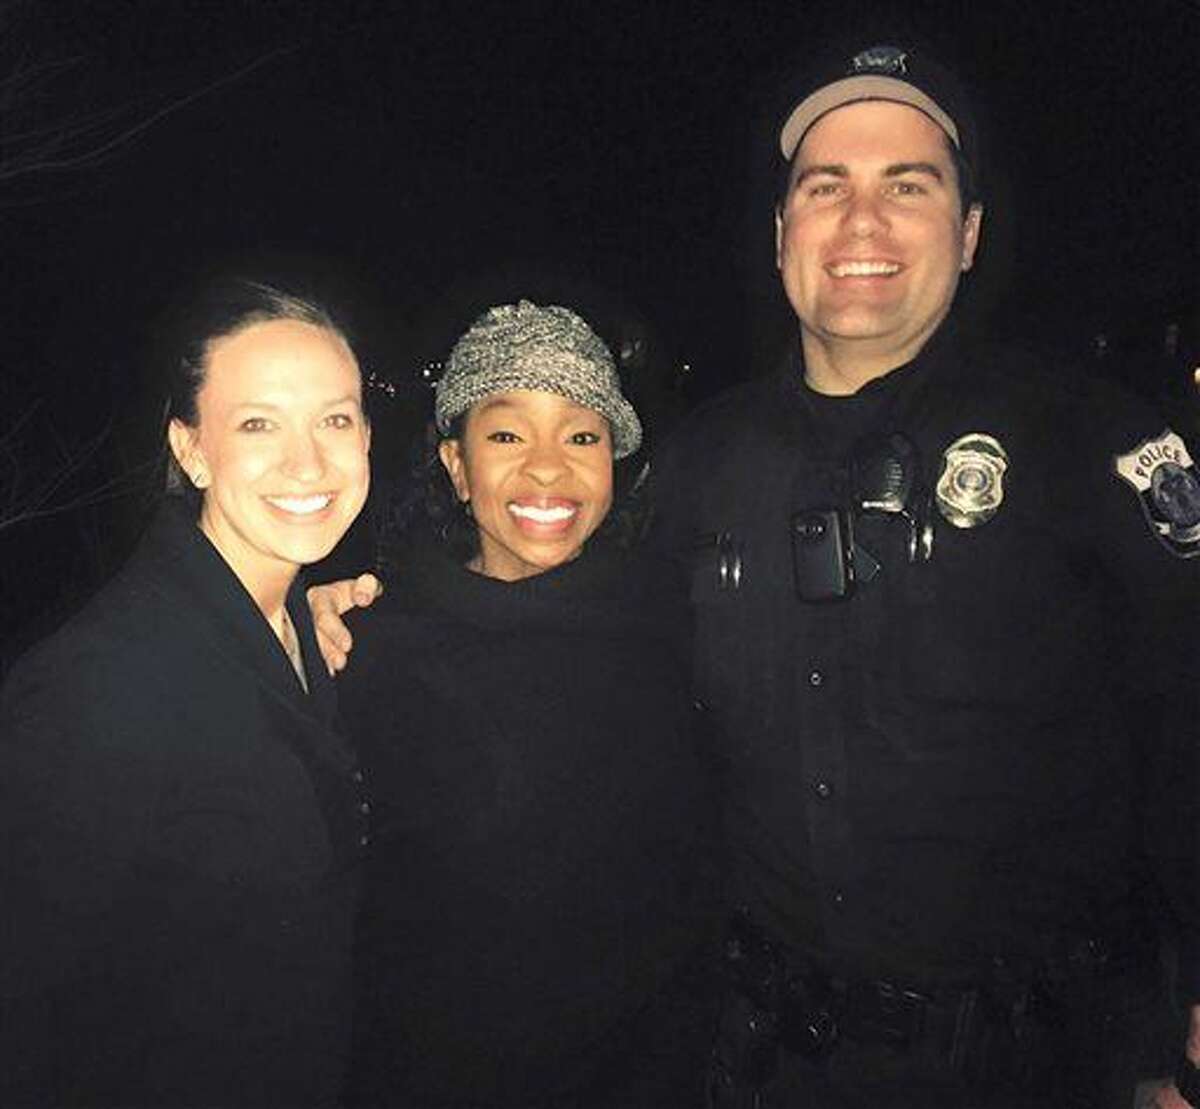 This photo provided by officer Paul Rogerson of the shows Rogerson, right, of the Pleasant Grove Police Department in Utah, singer Gladys Knight, center, and Rogerson's wife, left. 